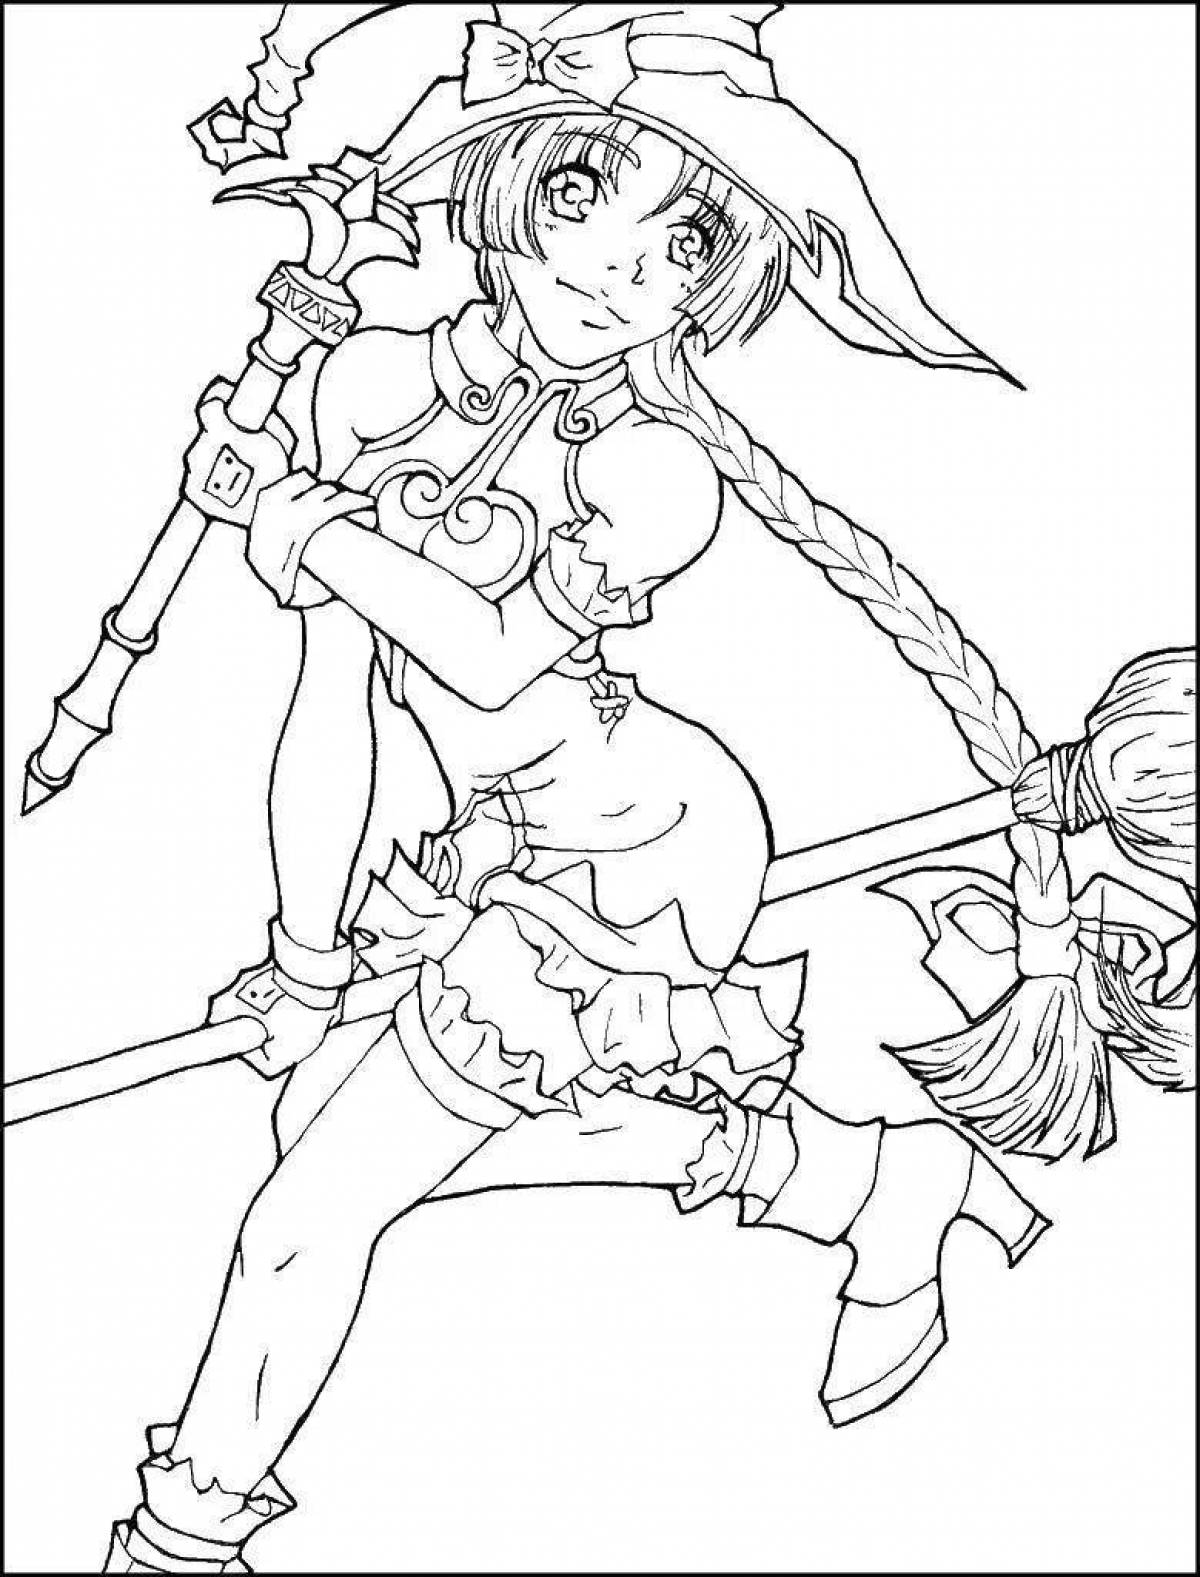 Anime witch tempting coloring book